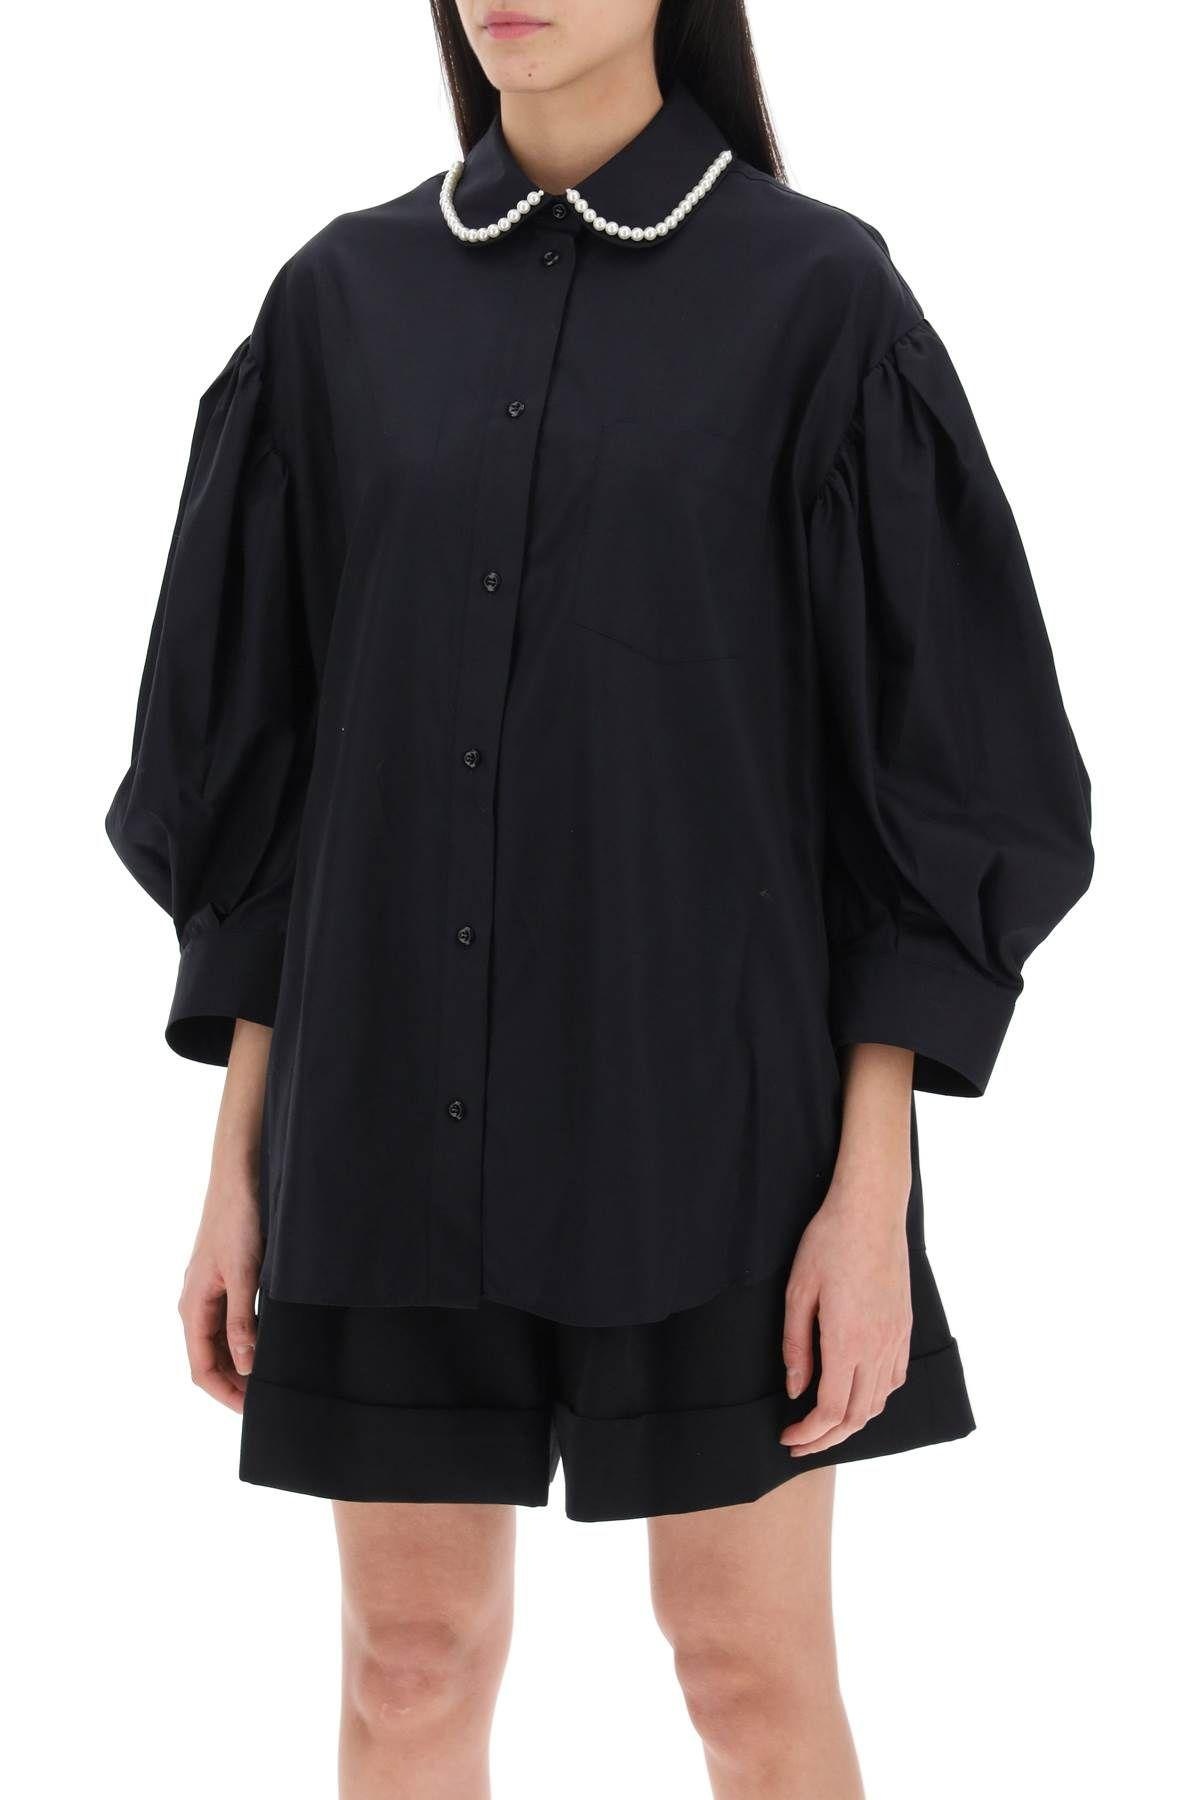 "Oversized blouse with puffed sleeves" Simone Rocha - 5